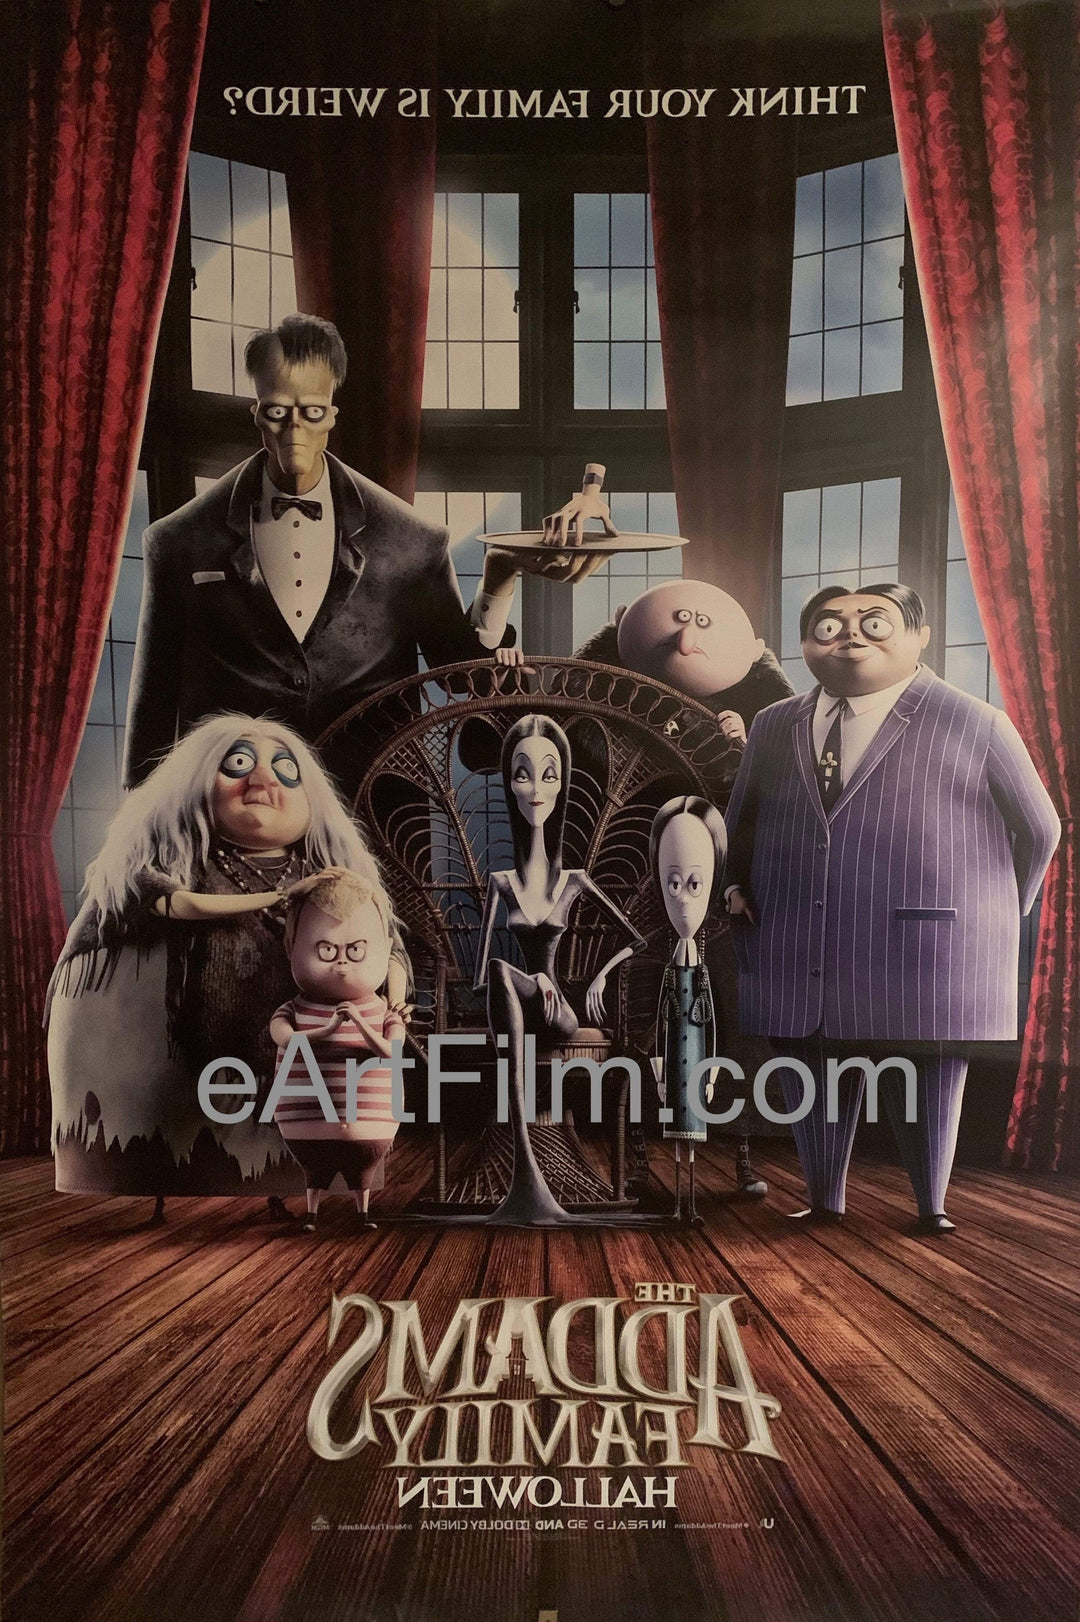 eArtFilm.com U.S Theatrical Release Bus Stop/Shelter Poster approx. 48"x70" Addams Family 2019 48x70 DS Animated eccentric family comedy Charlize Theron